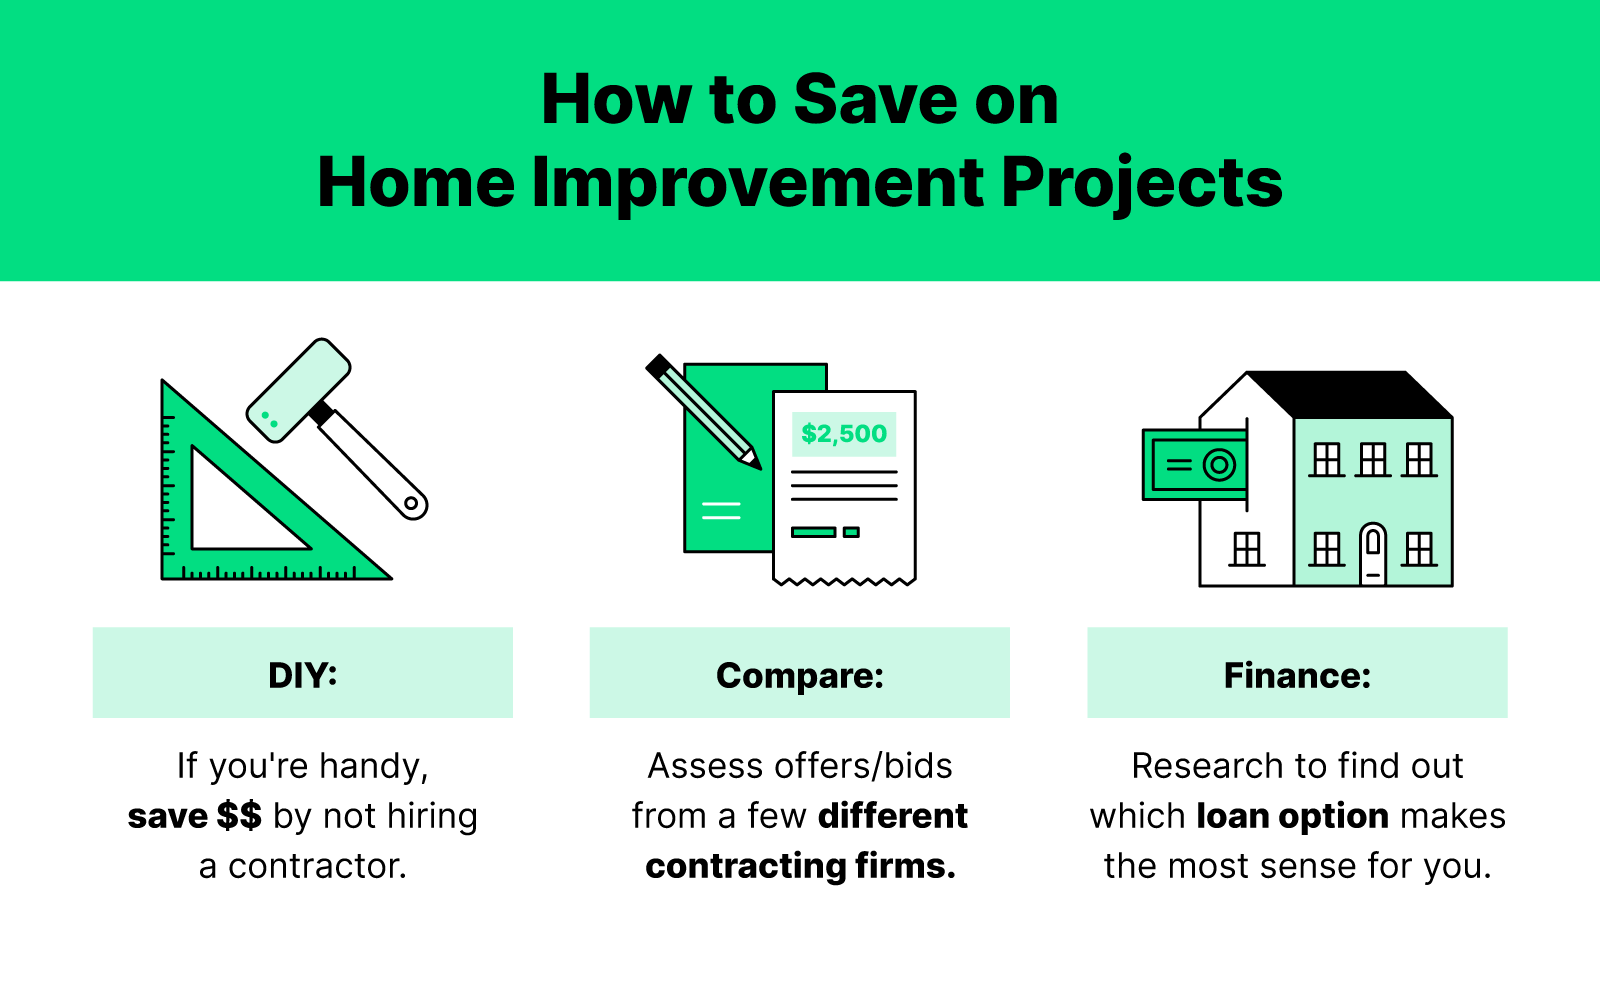 Green black and white illustrations of tools, paperwork and a home with text on how to save on projects